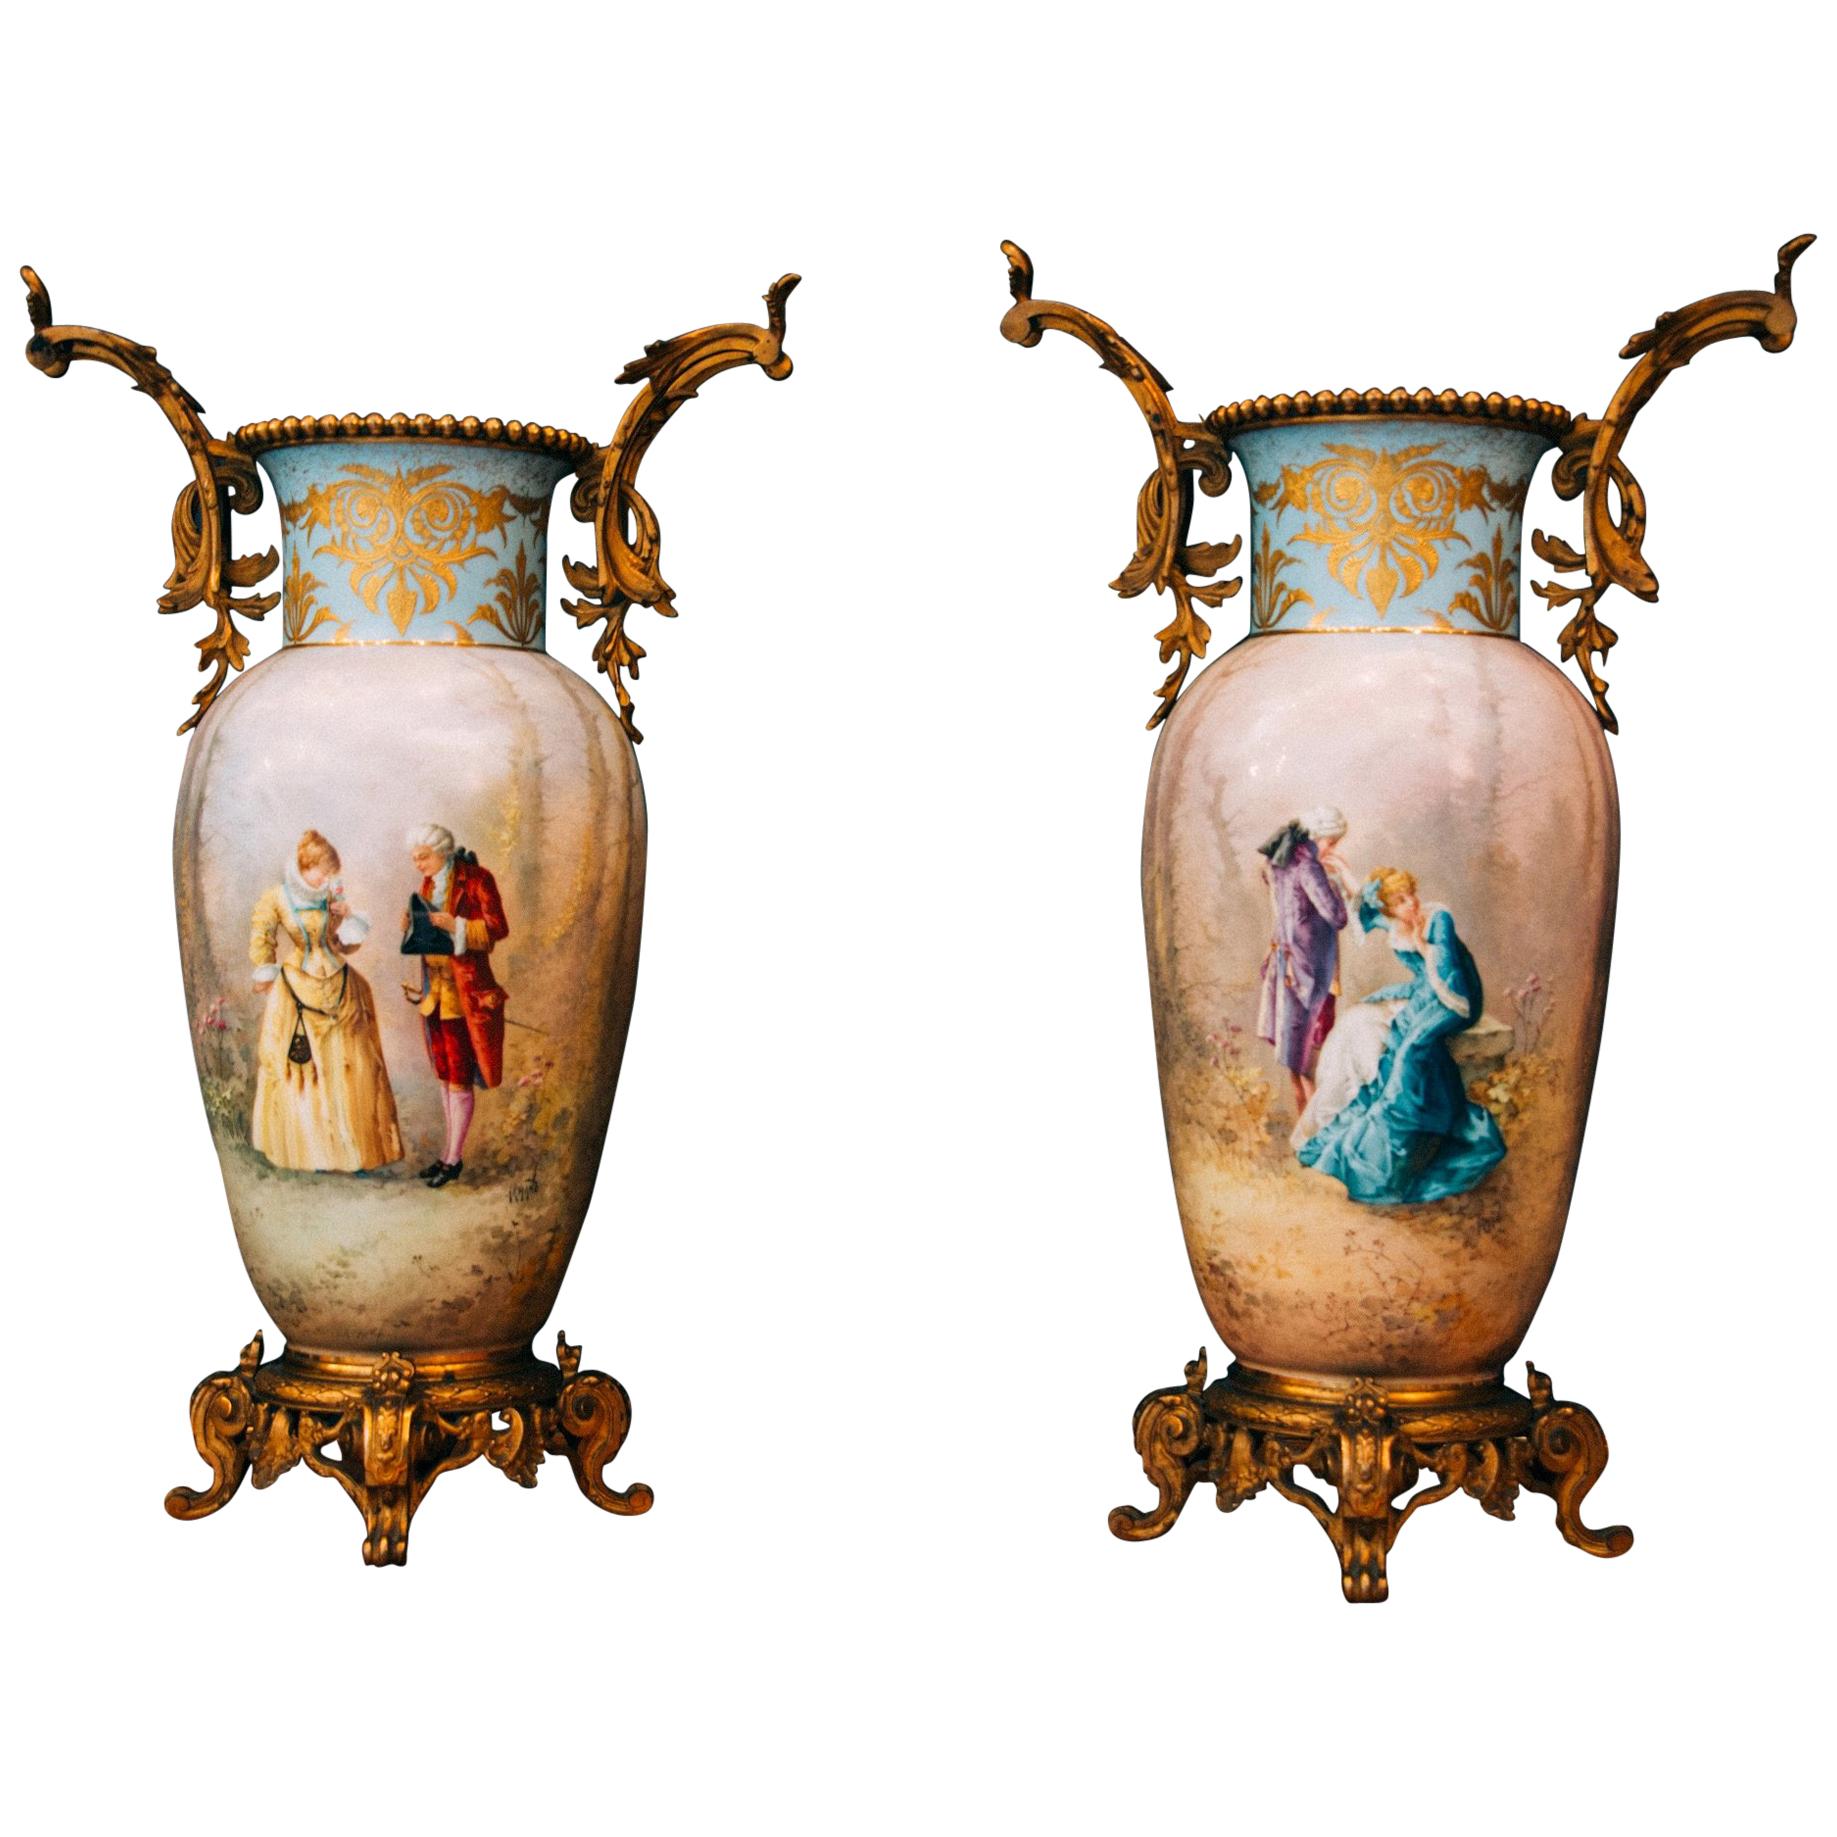 Pair of 19th Century French Enamel on Copper & Pearl Sevres Vases For Sale